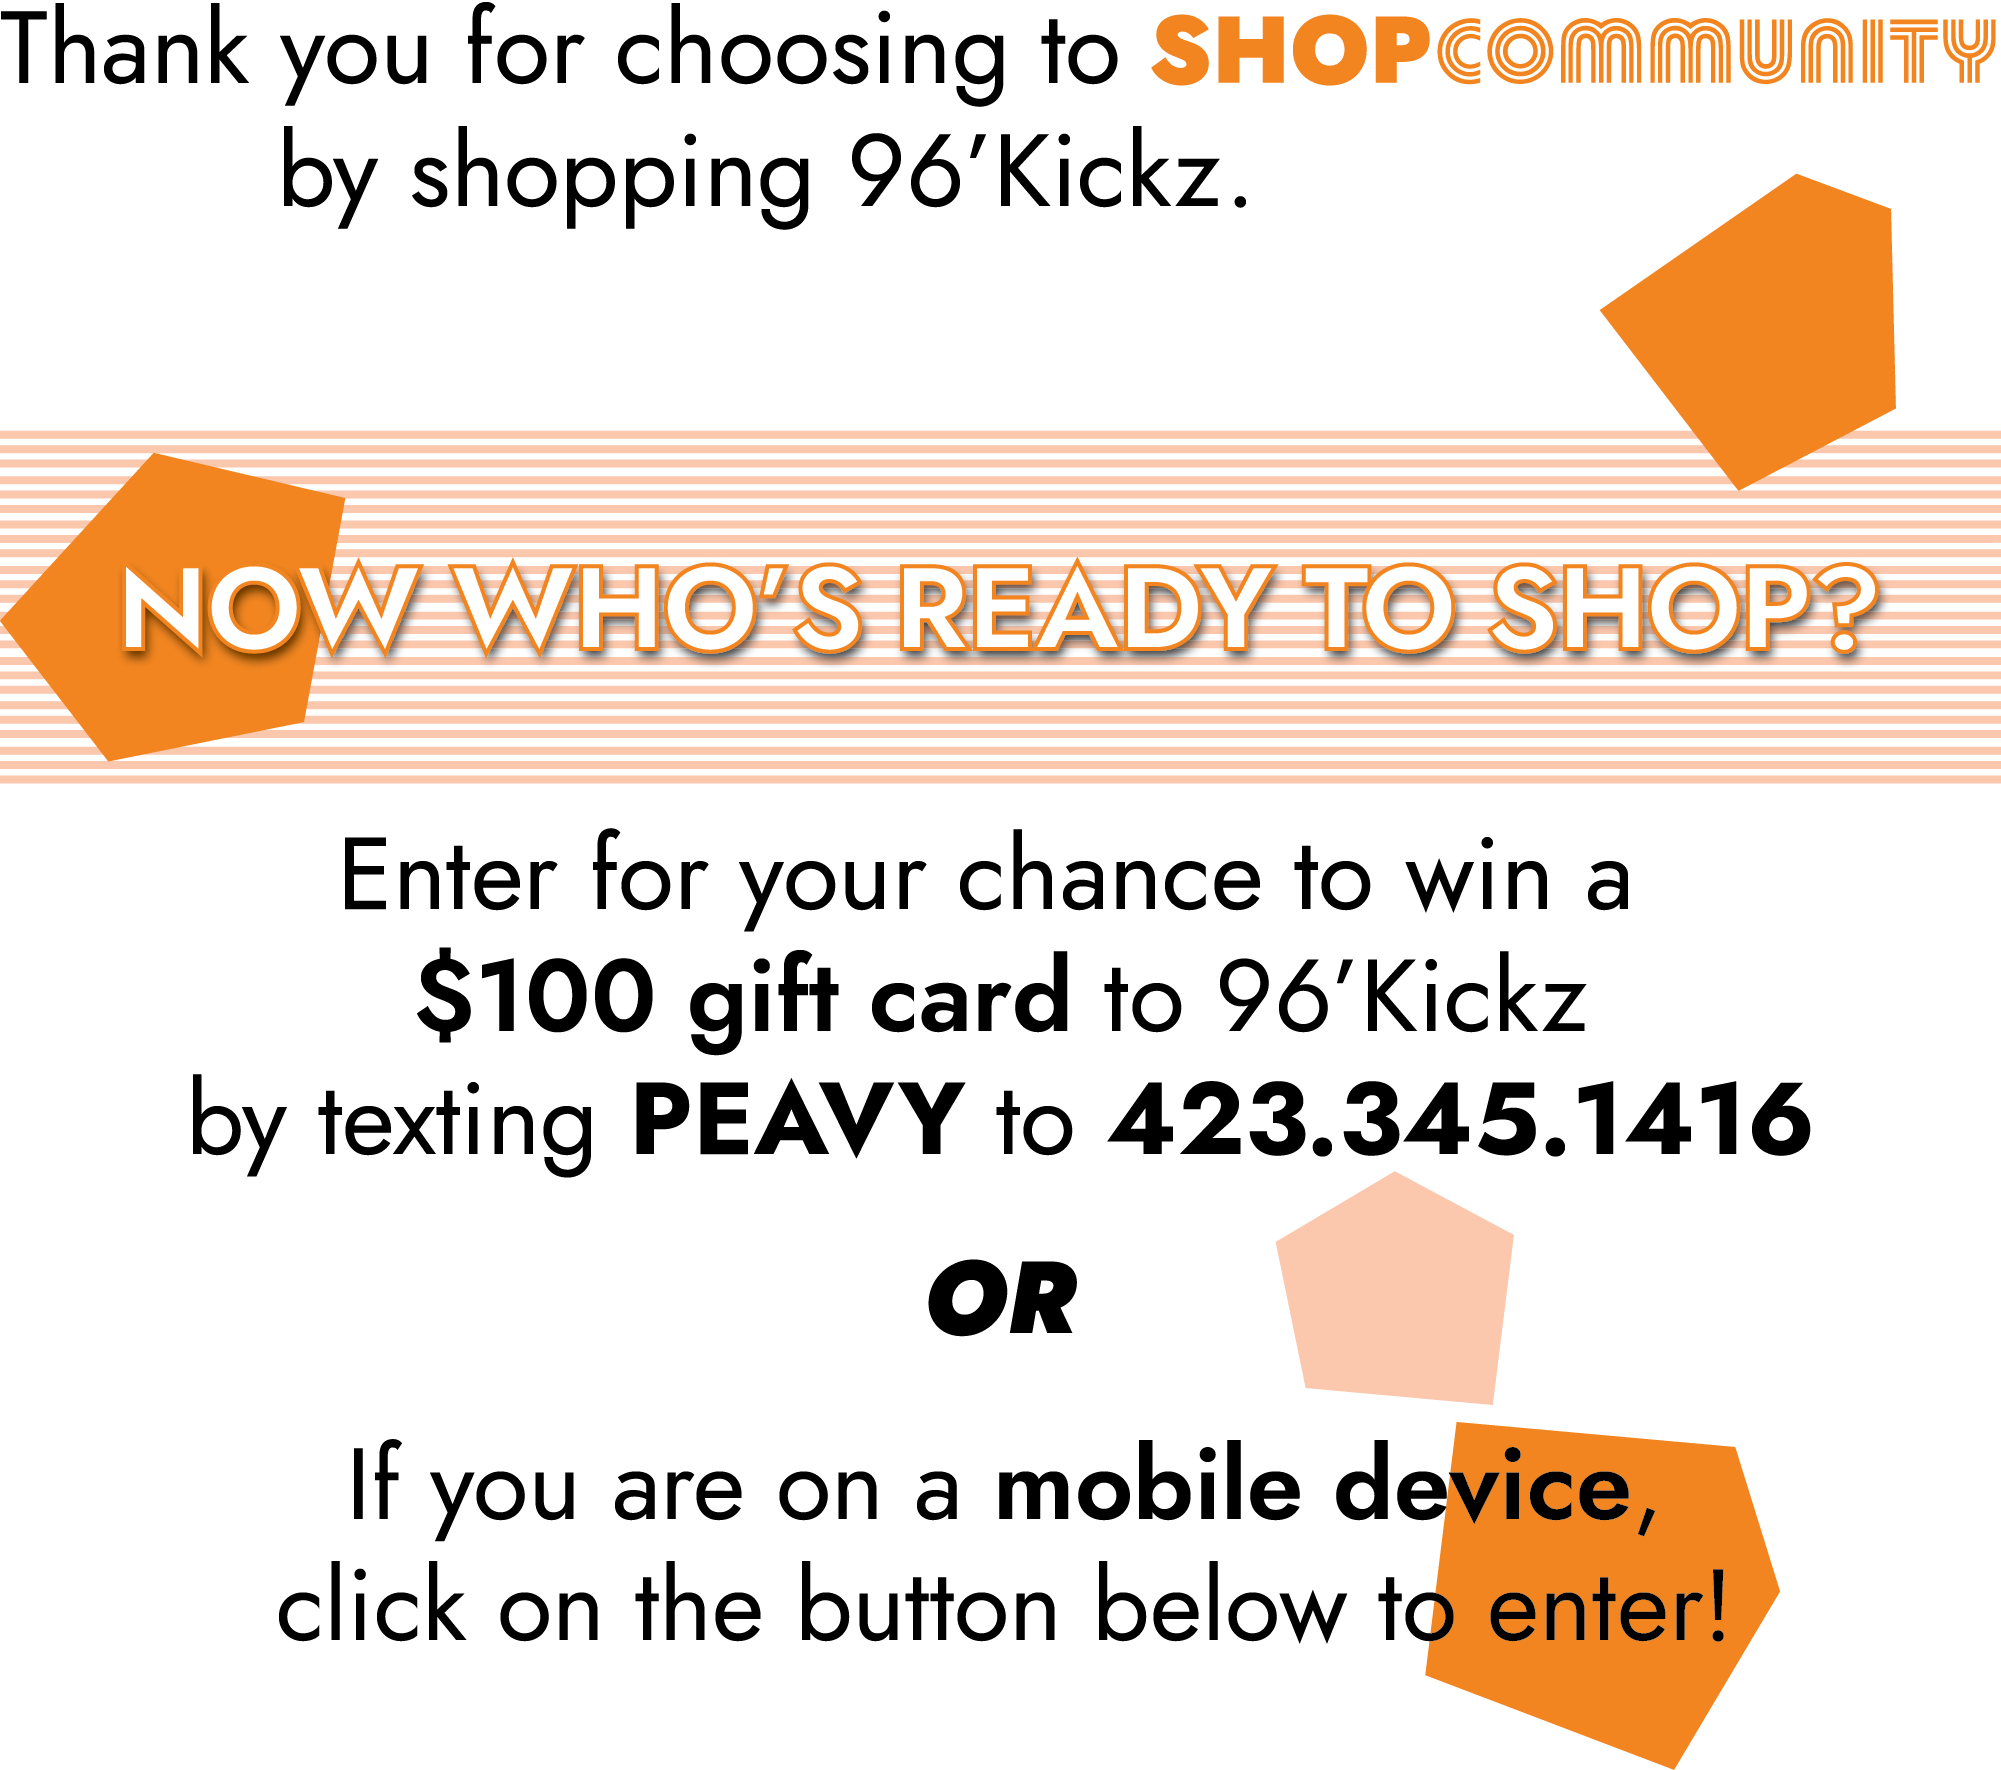 Thank you for choosing to ShopCommunity by shopping 96'Kickz.          Now who's ready to shop?          Enter for your chance to win a $100 gift card to 96'Kickz by texting PEAVY to 423.345.1416.          OR          If you are on a mobile device, click on the button below to enter: